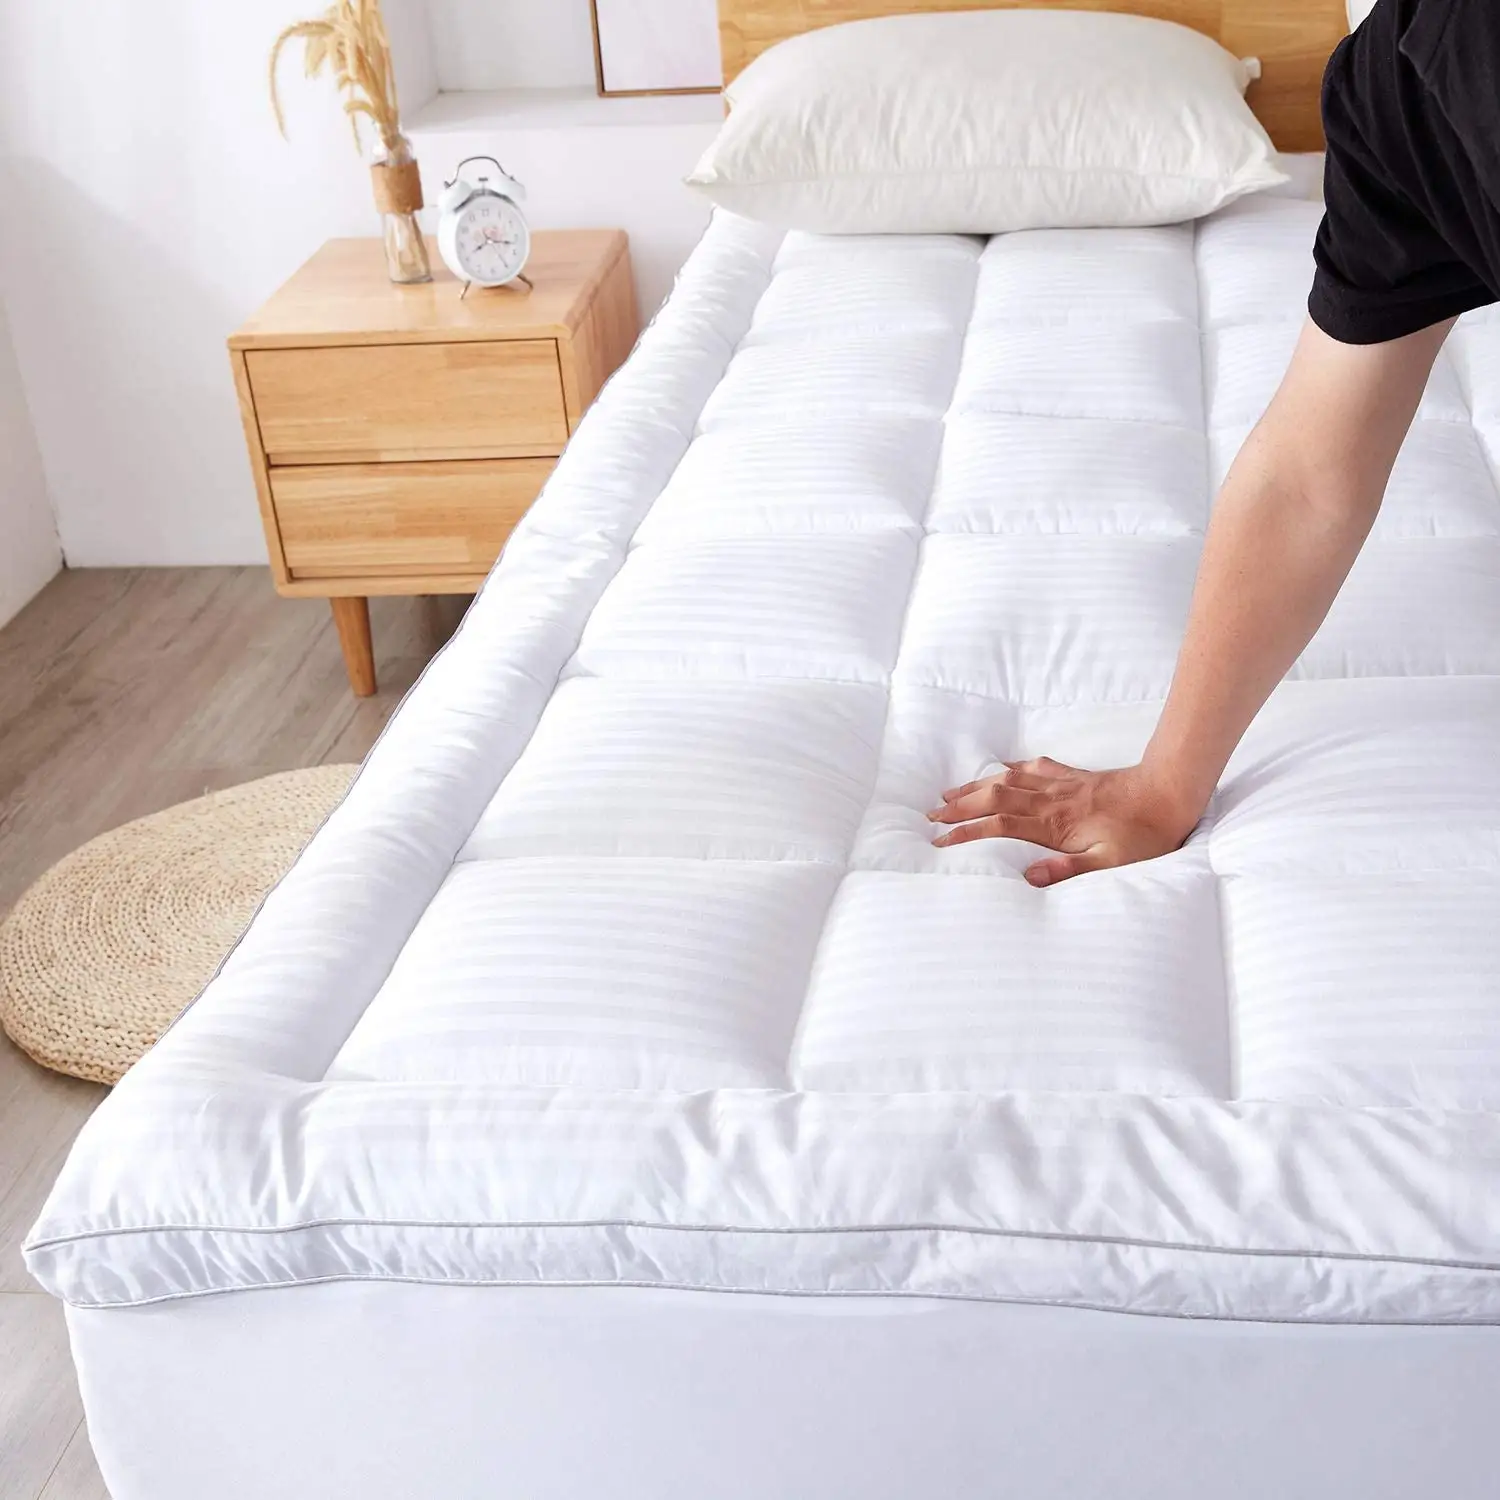 Customized color 100% polyester mattress topper pad bed silicone gel mattress topper for home hotel